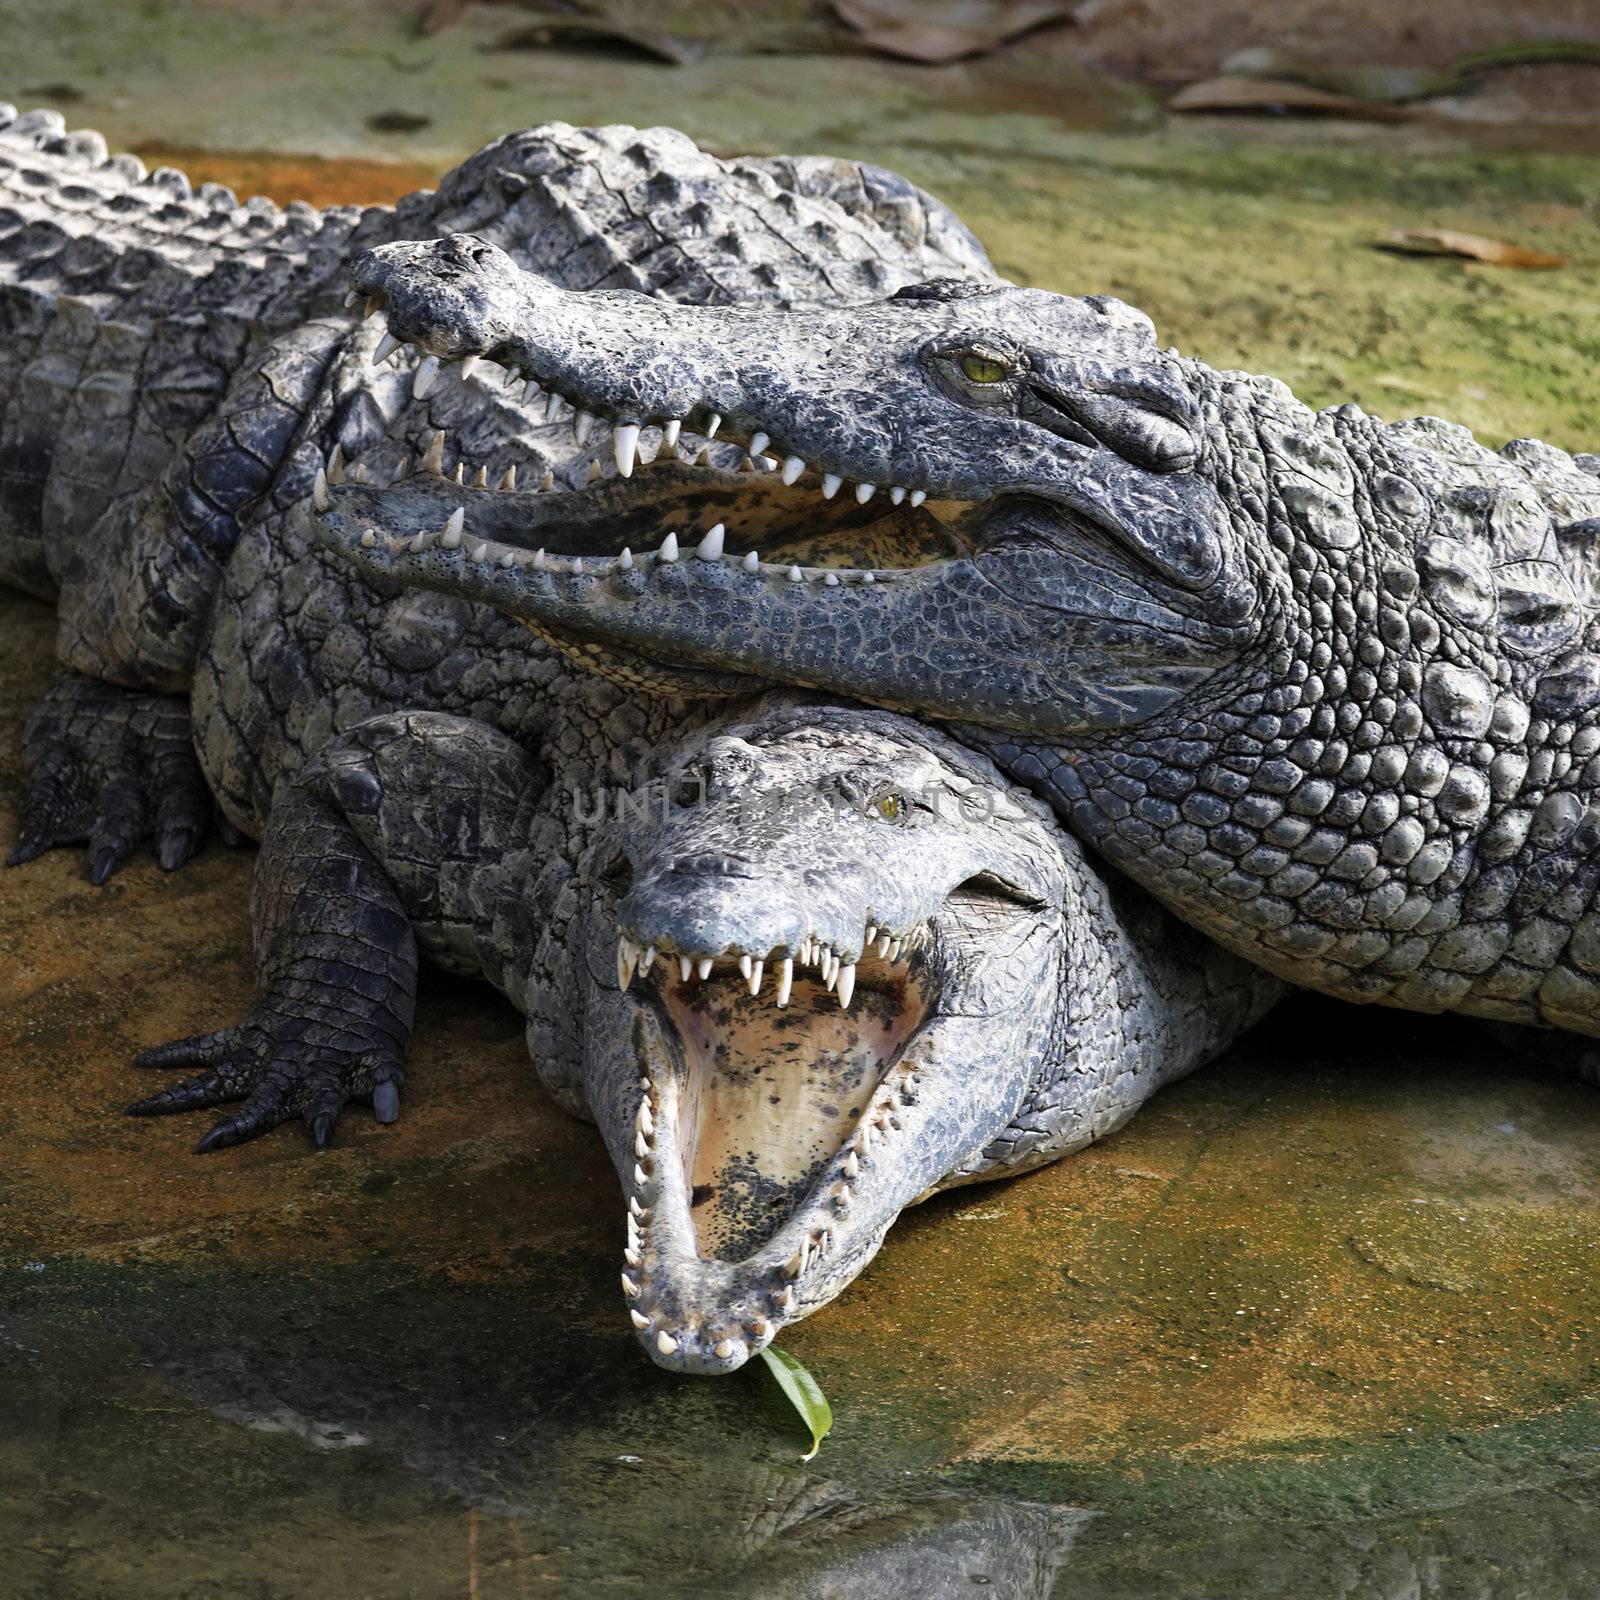 Crocodile with head above other crocodiles in a zoo